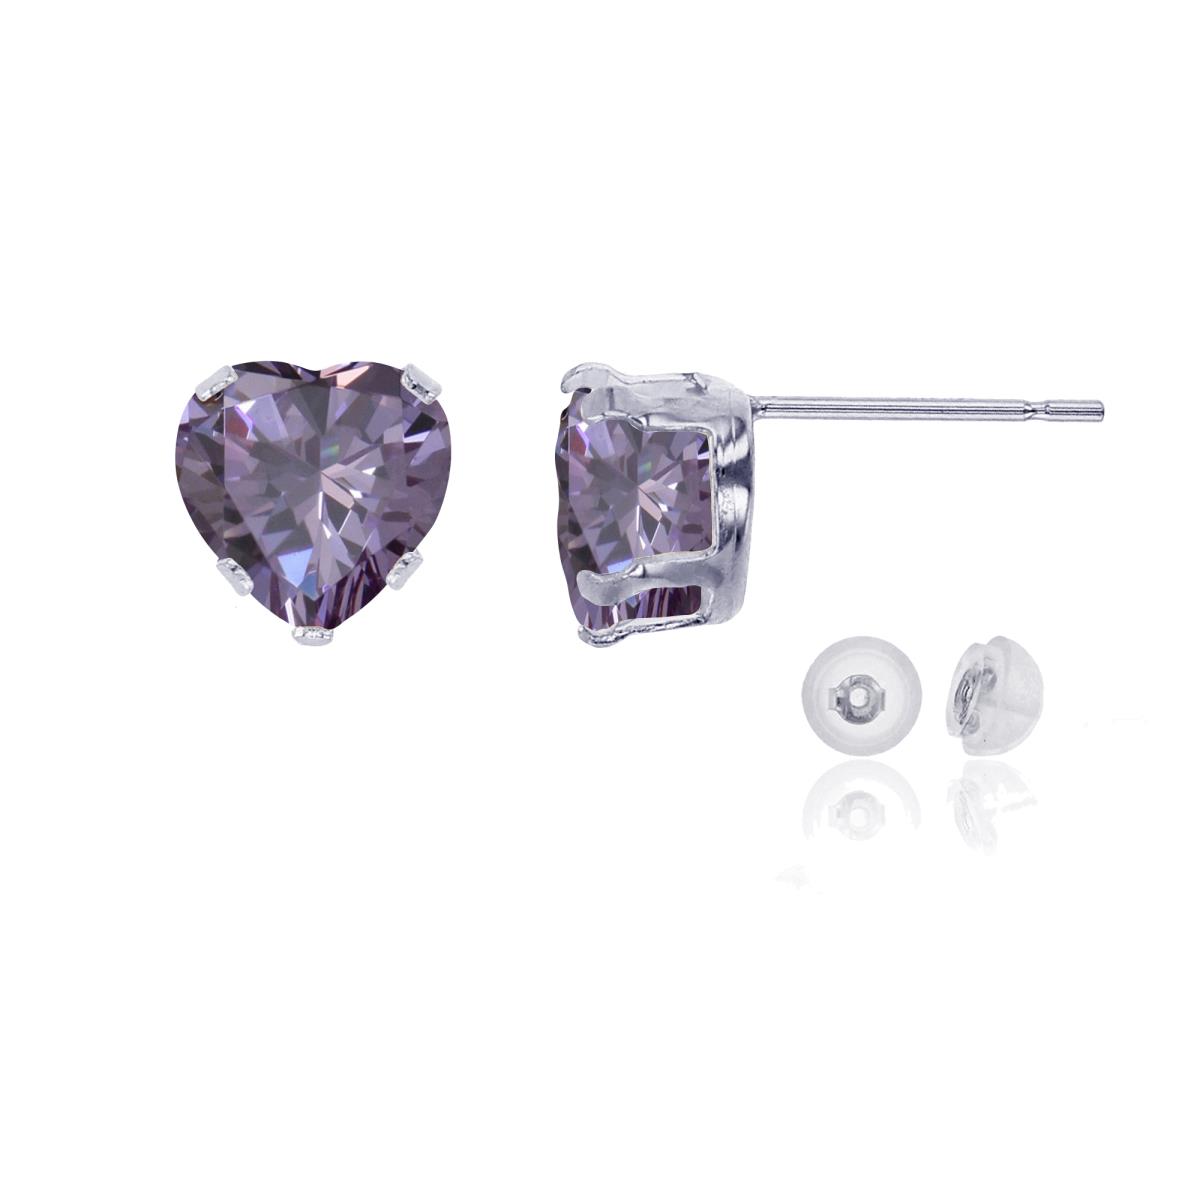 10K White Gold 6x6mm Heart Amethyst Stud Earring with Silicone Back